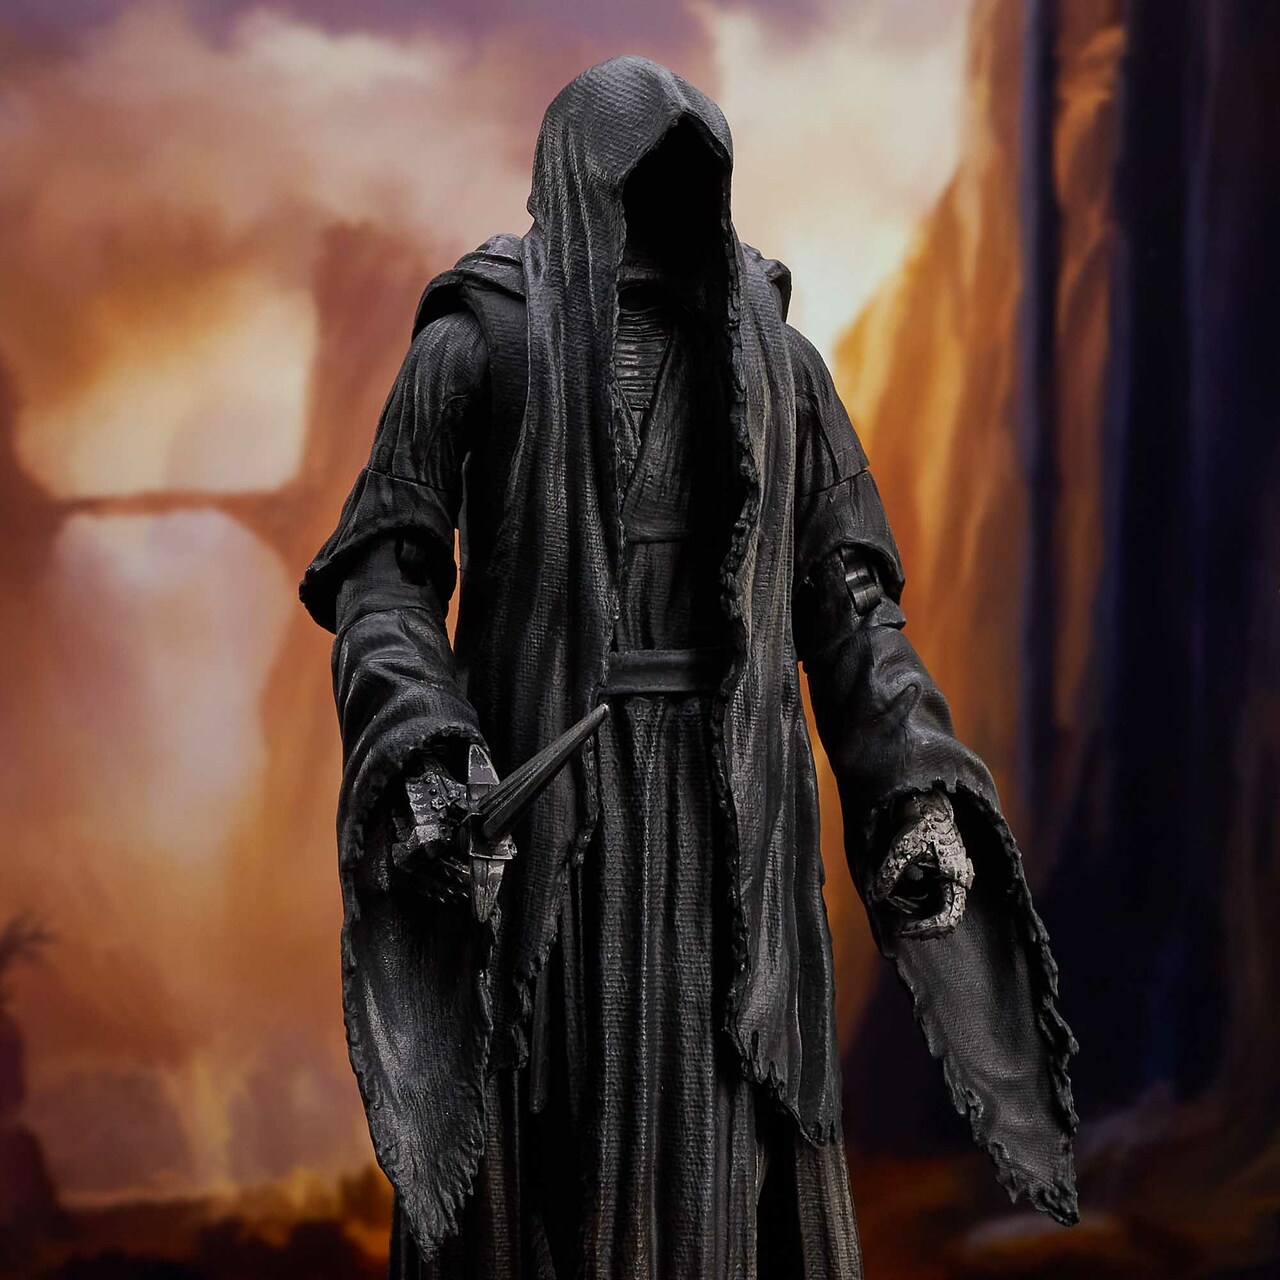 Lord of the Rings Select Actionfigur 18 cm Nazgul  699788843680